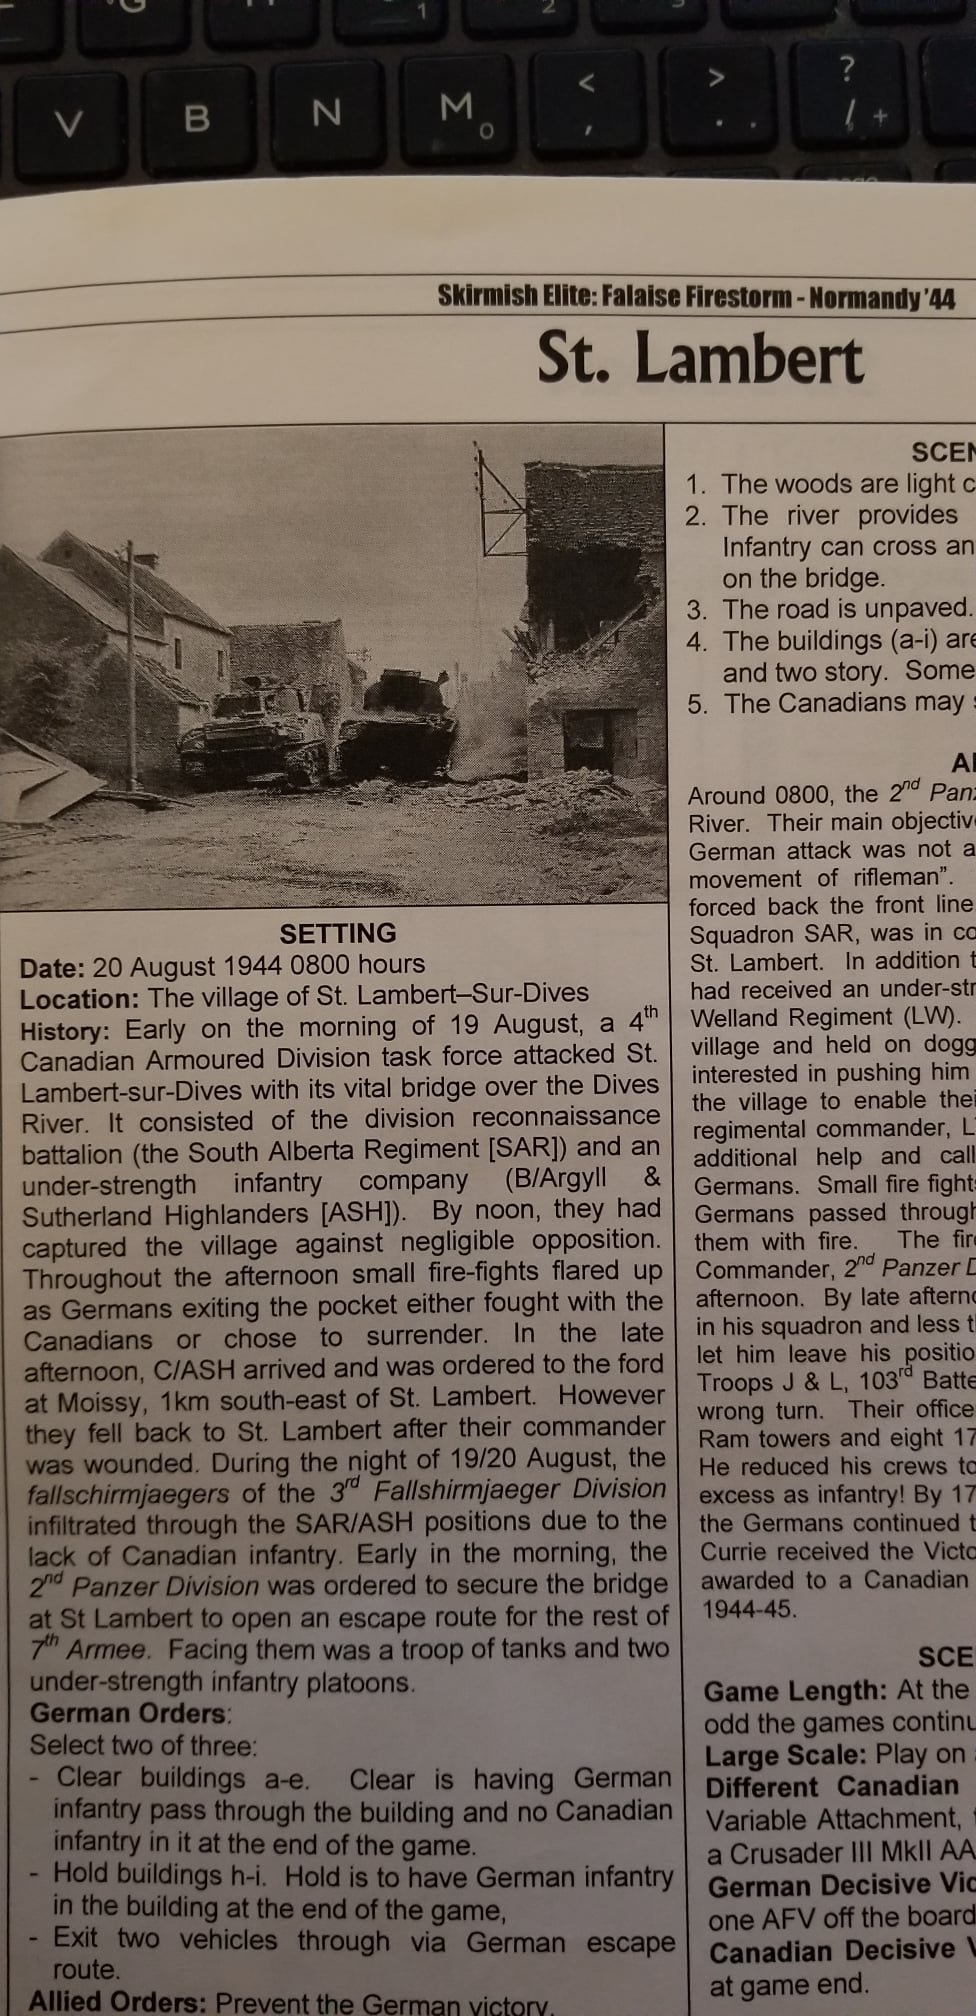 Each scenario from the SC books includes details on the battle. This is for August 20, 1944 the day after the St. Lambert scenario in the back of the IABSM Rulebook.